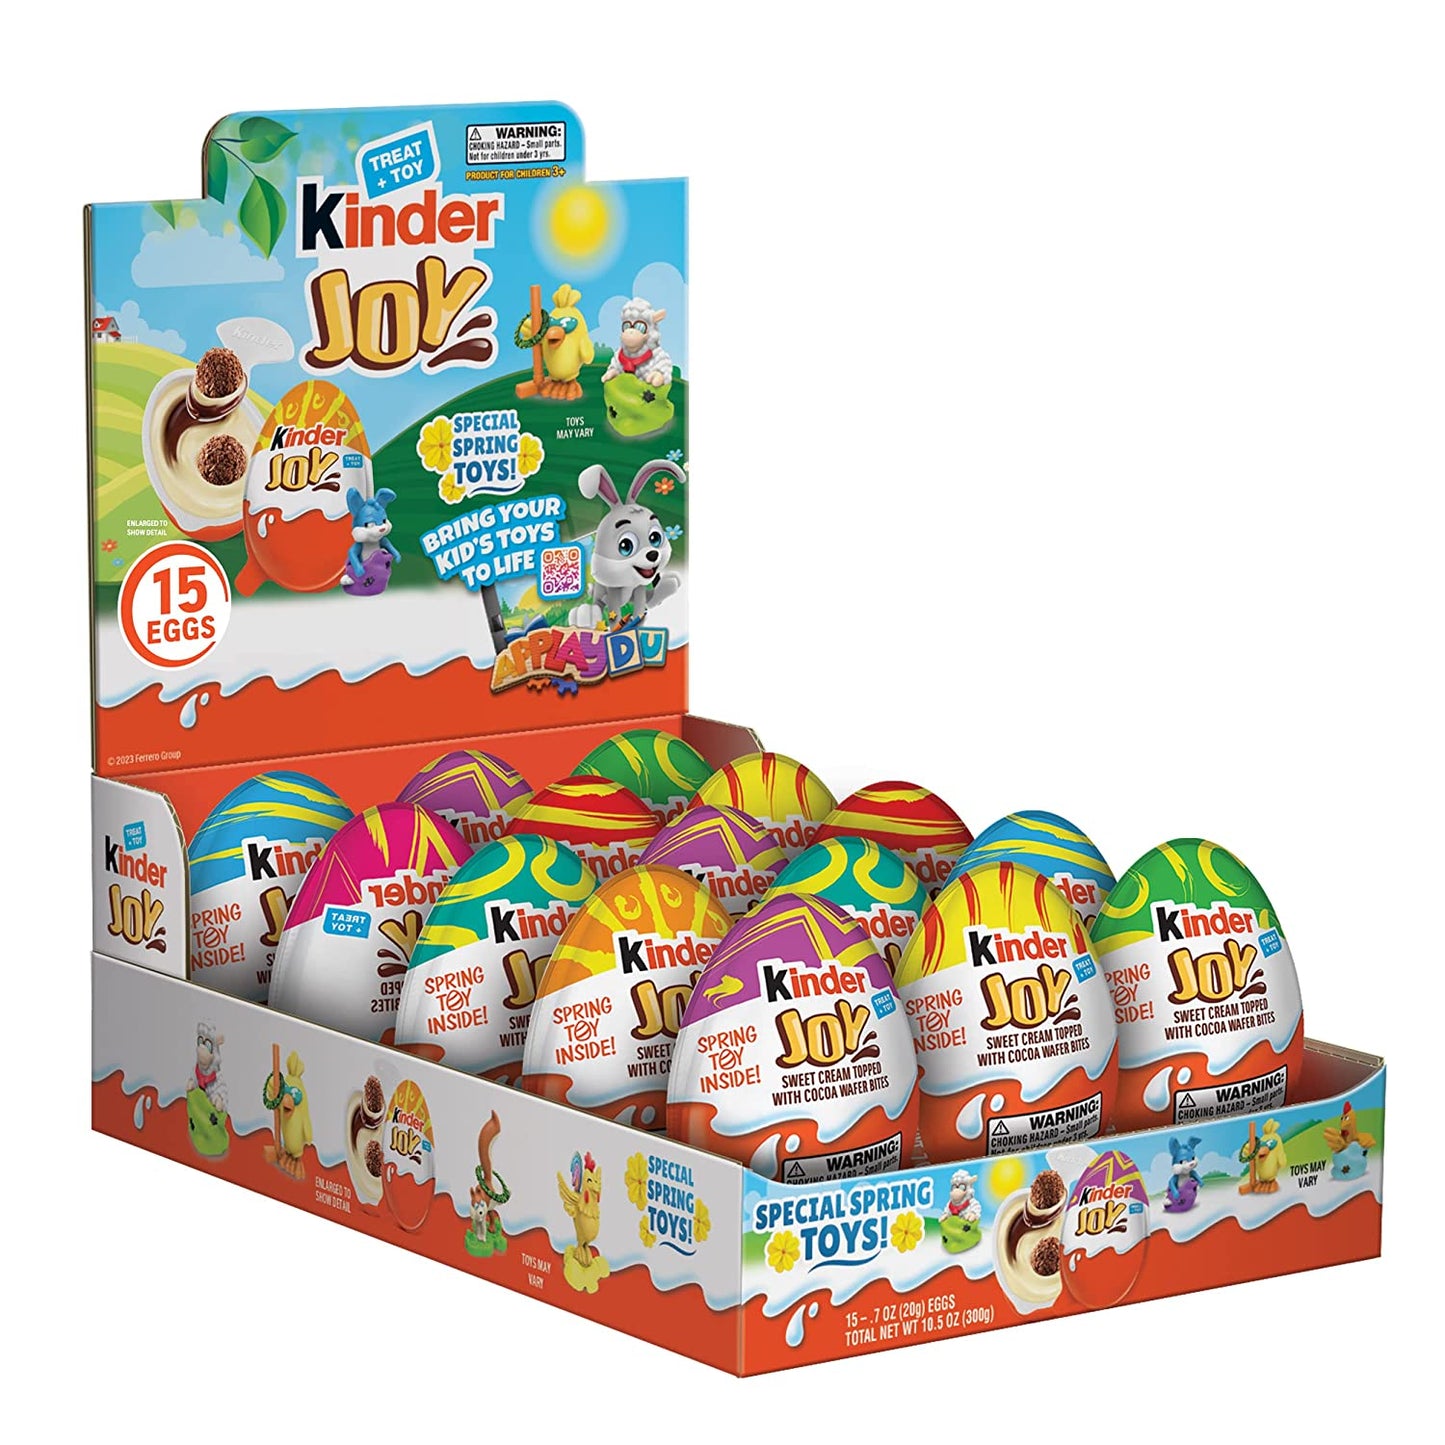 Kinder Joy Easter Eggs, Cream and Chocolatey Wafers with Toy Inside, 10.5 oz, Great for Easter Egg Hunts, 1 Pack, 15 Eggs